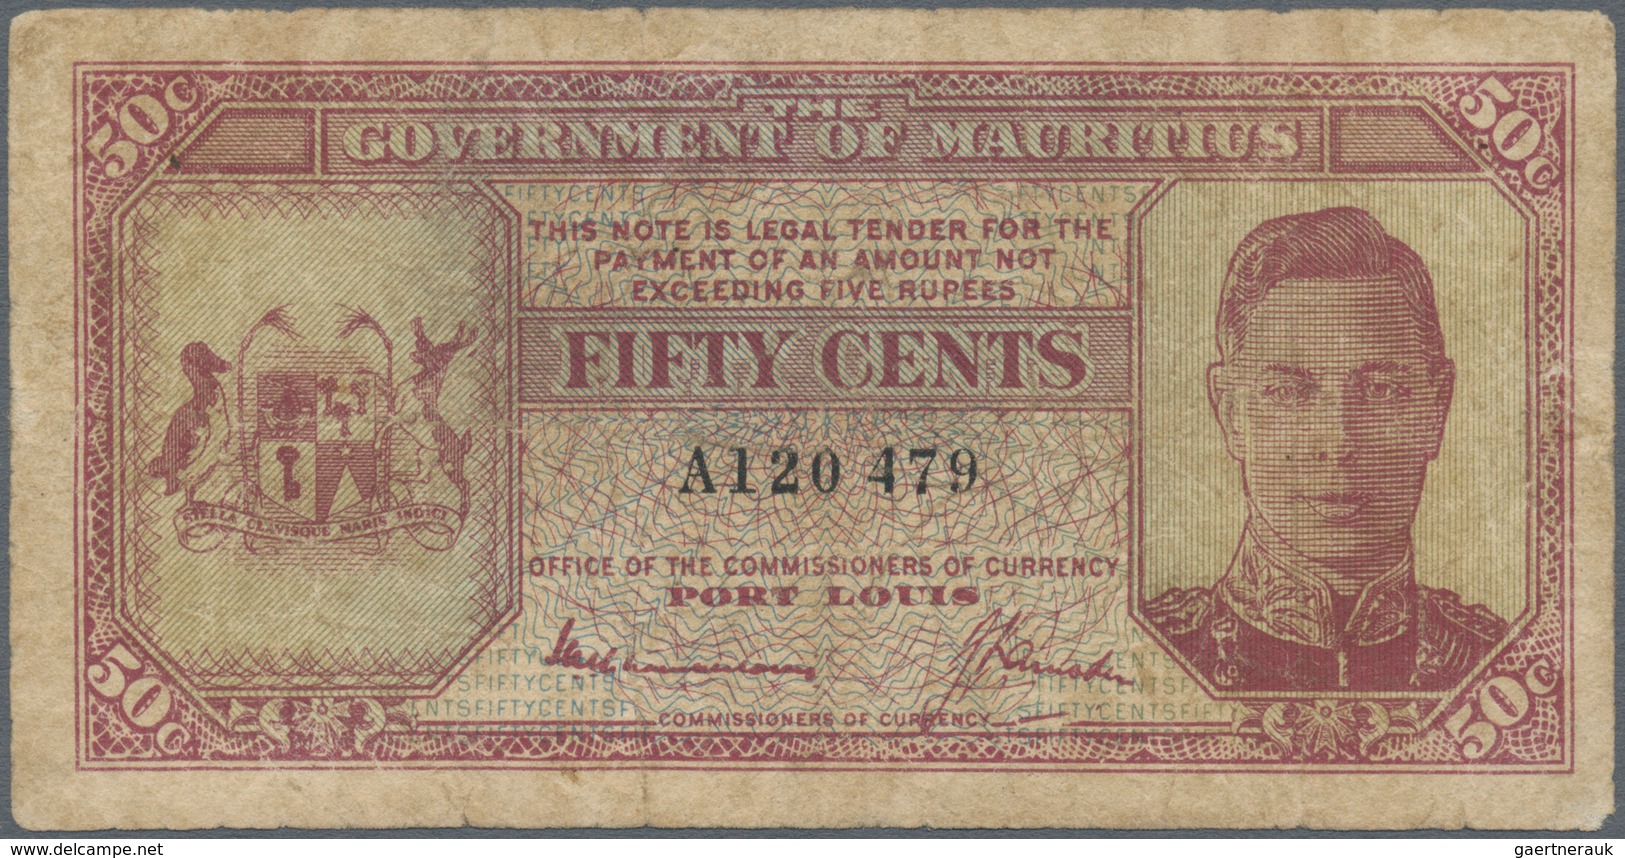 Mauritius: 50 Cents ND(1940) P. 25a, Portrait KGVI, Used With Folds And Creases, Borders A Bit Worn, - Mauricio